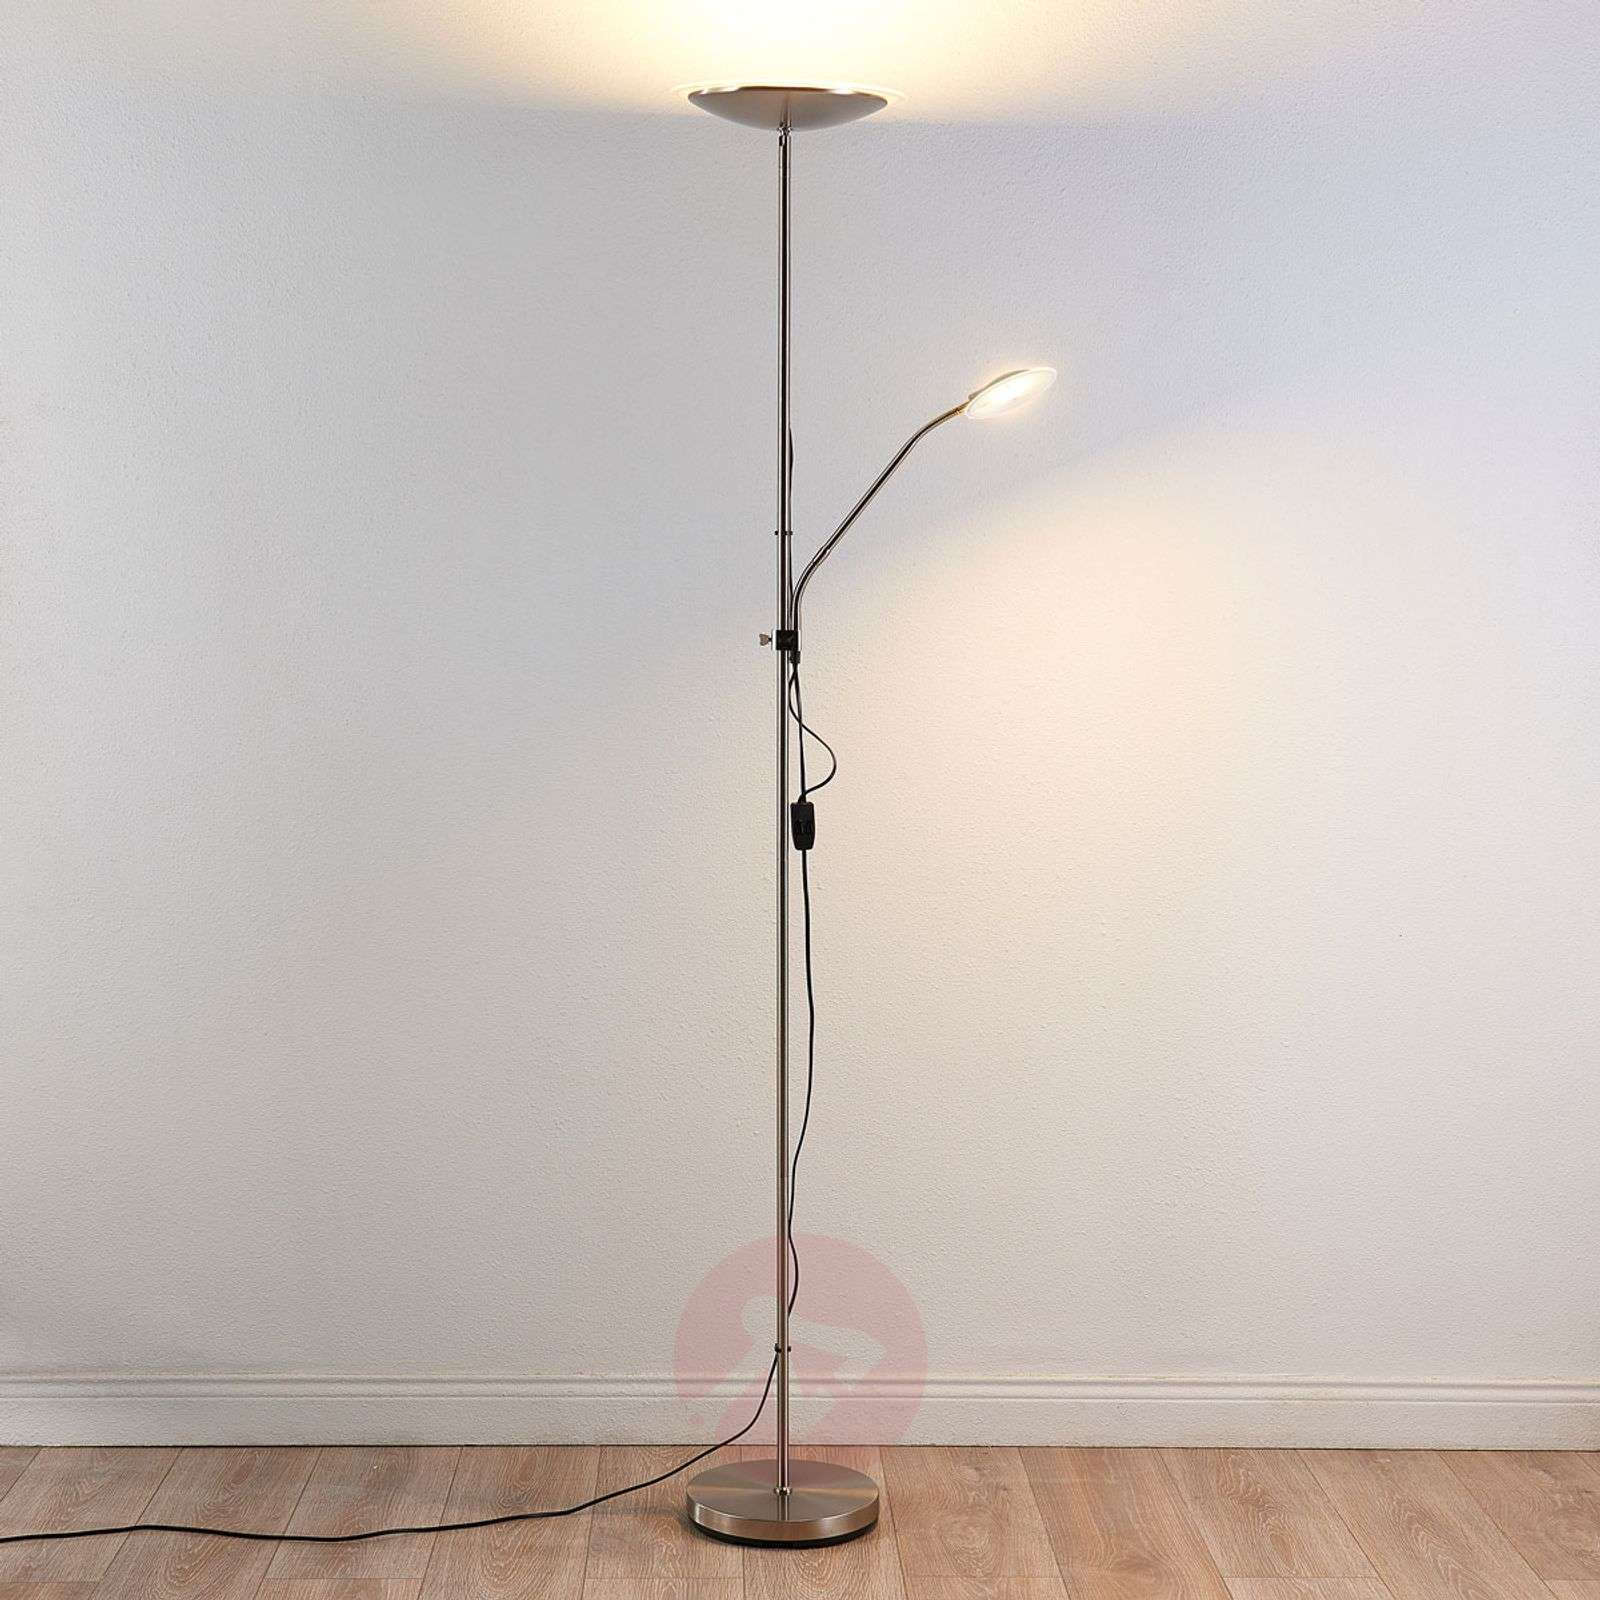 Discreet Led Floor Lamp Ela With Reading Arm intended for sizing 1600 X 1600